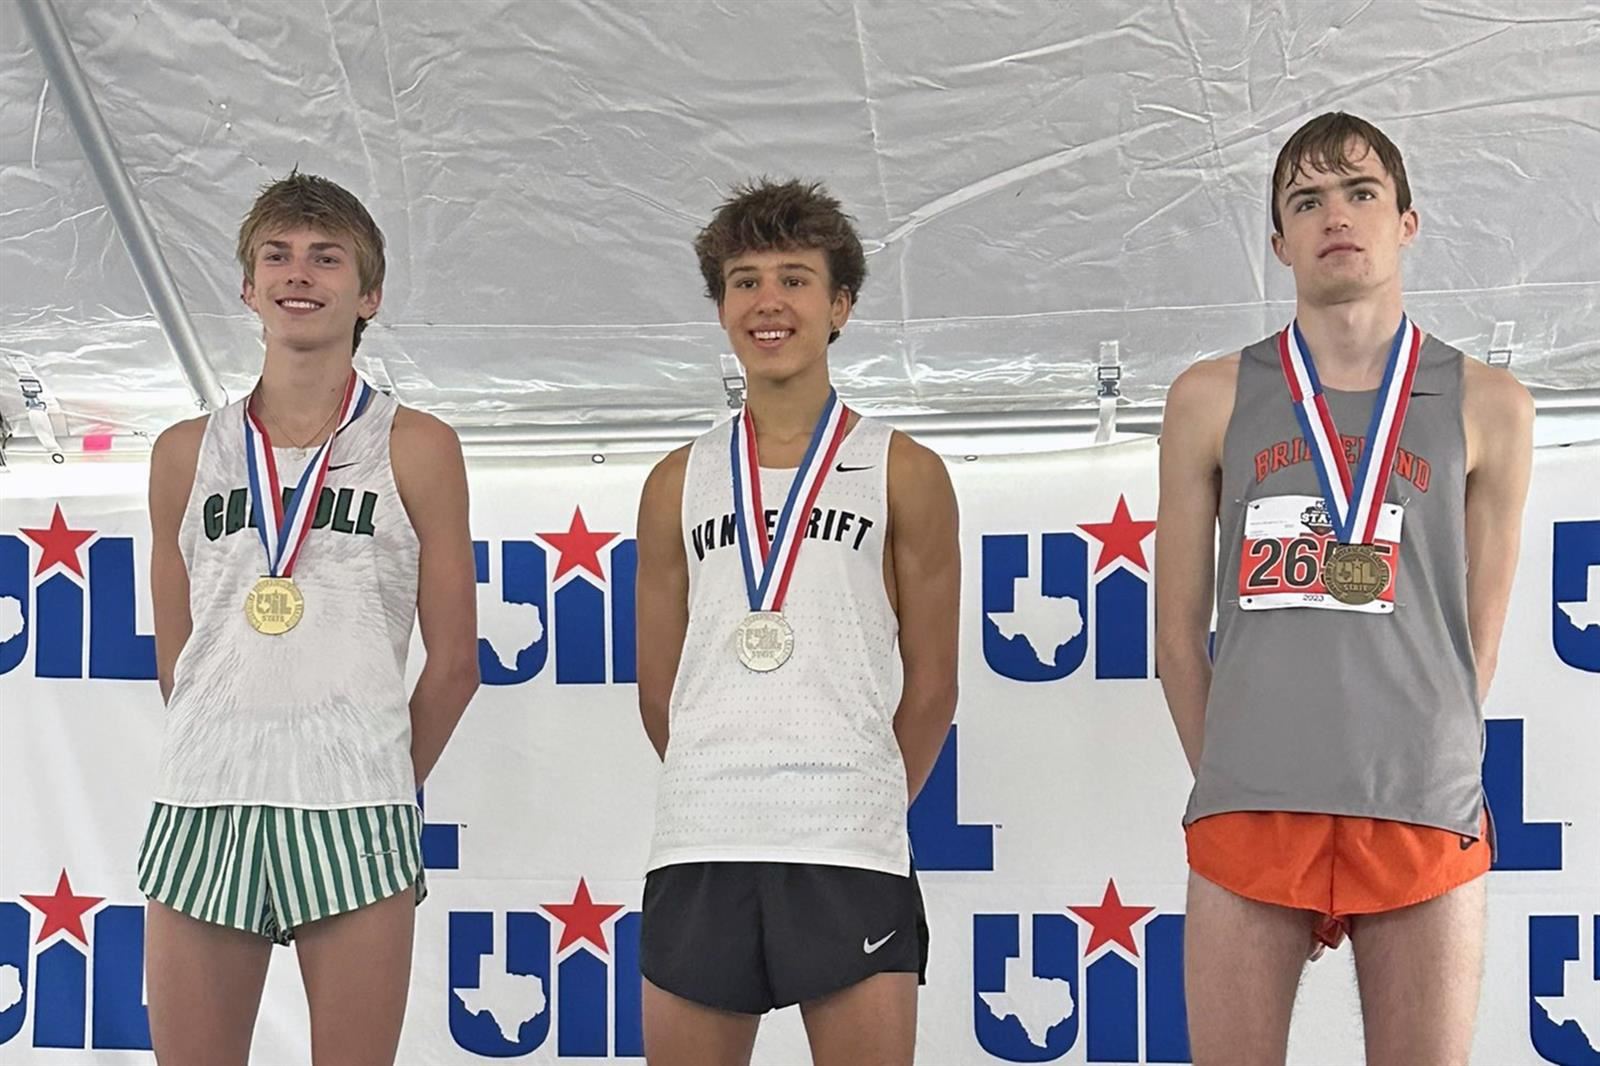 Bridgeland junior Benjamin Montgomery, right, placed third overall with a time of 15:06.70 at the UIL State.